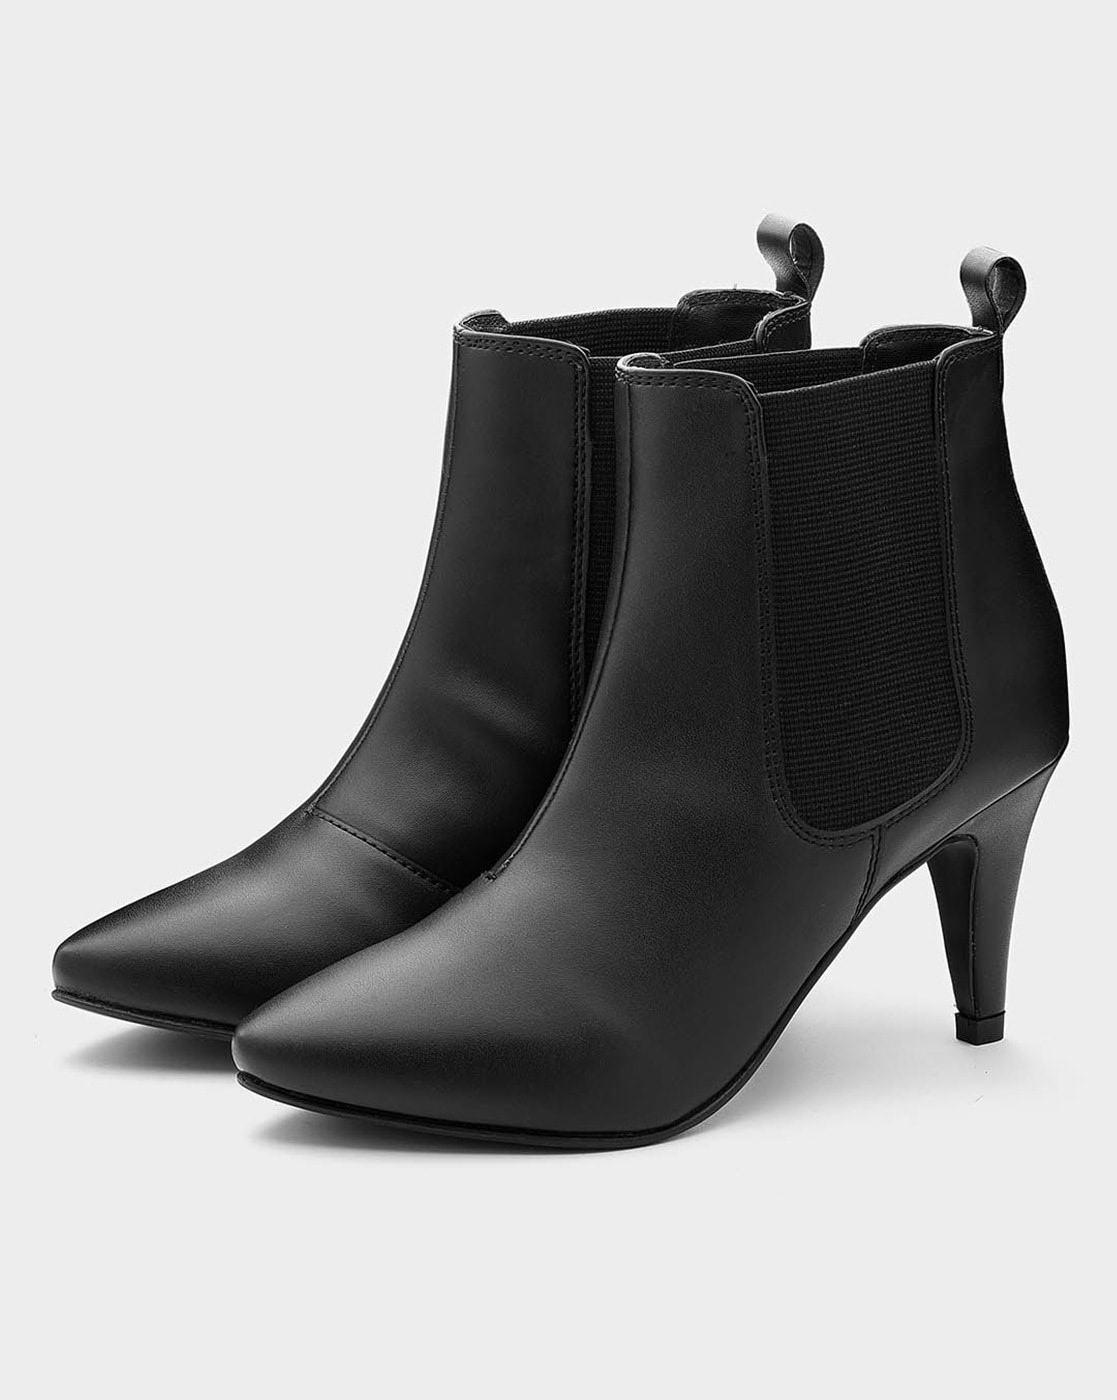 Details more than 123 black heeled boots latest